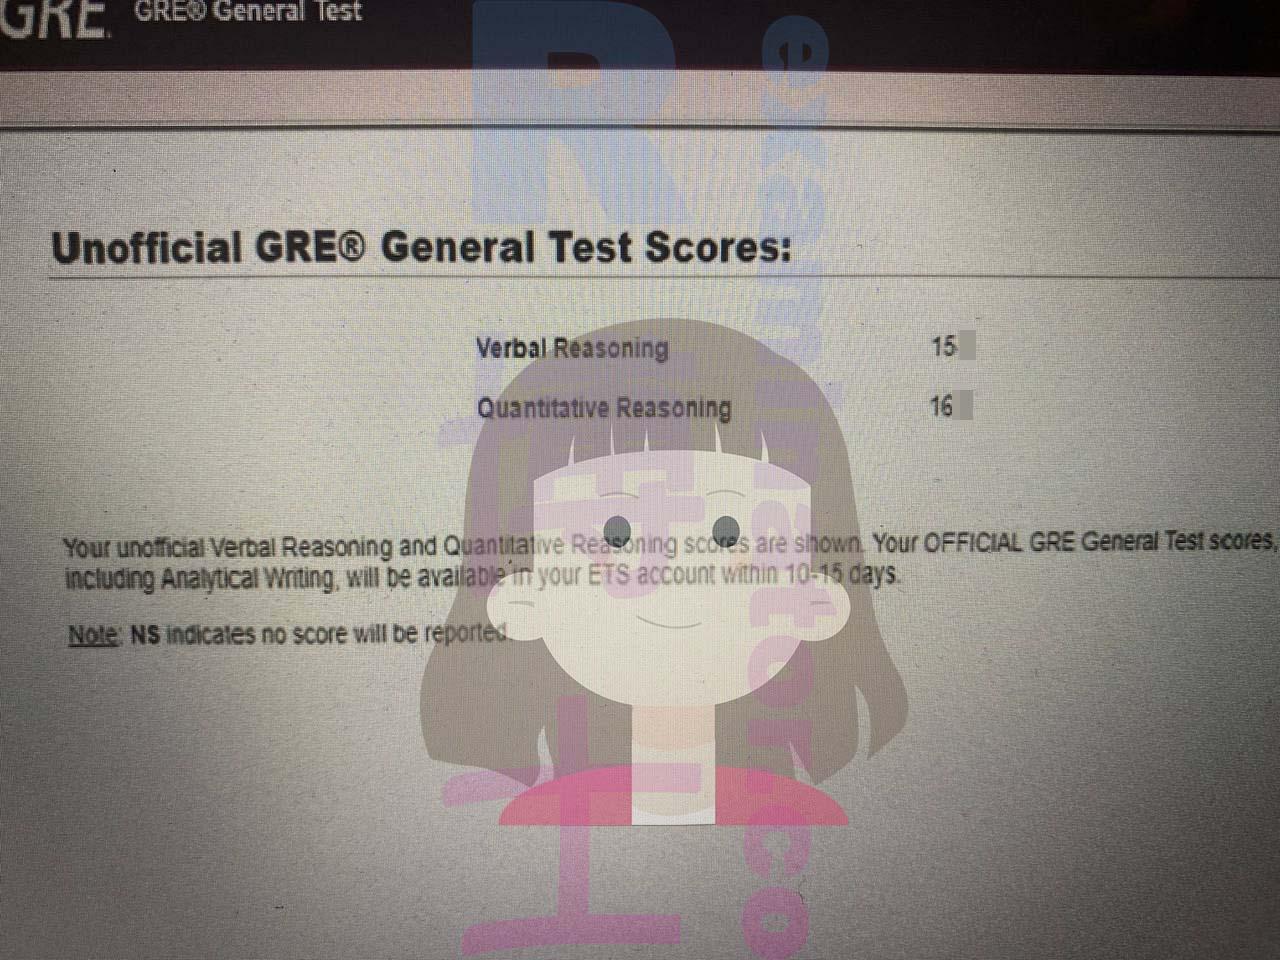 🇩🇪 "Omg you guys are heroes" From Chaos to Success🌟 : Our Proxy Testing Expert with COVID-19 🦠 Still Shows Up to Help European Student Ace the GRE Exam 💪🏼